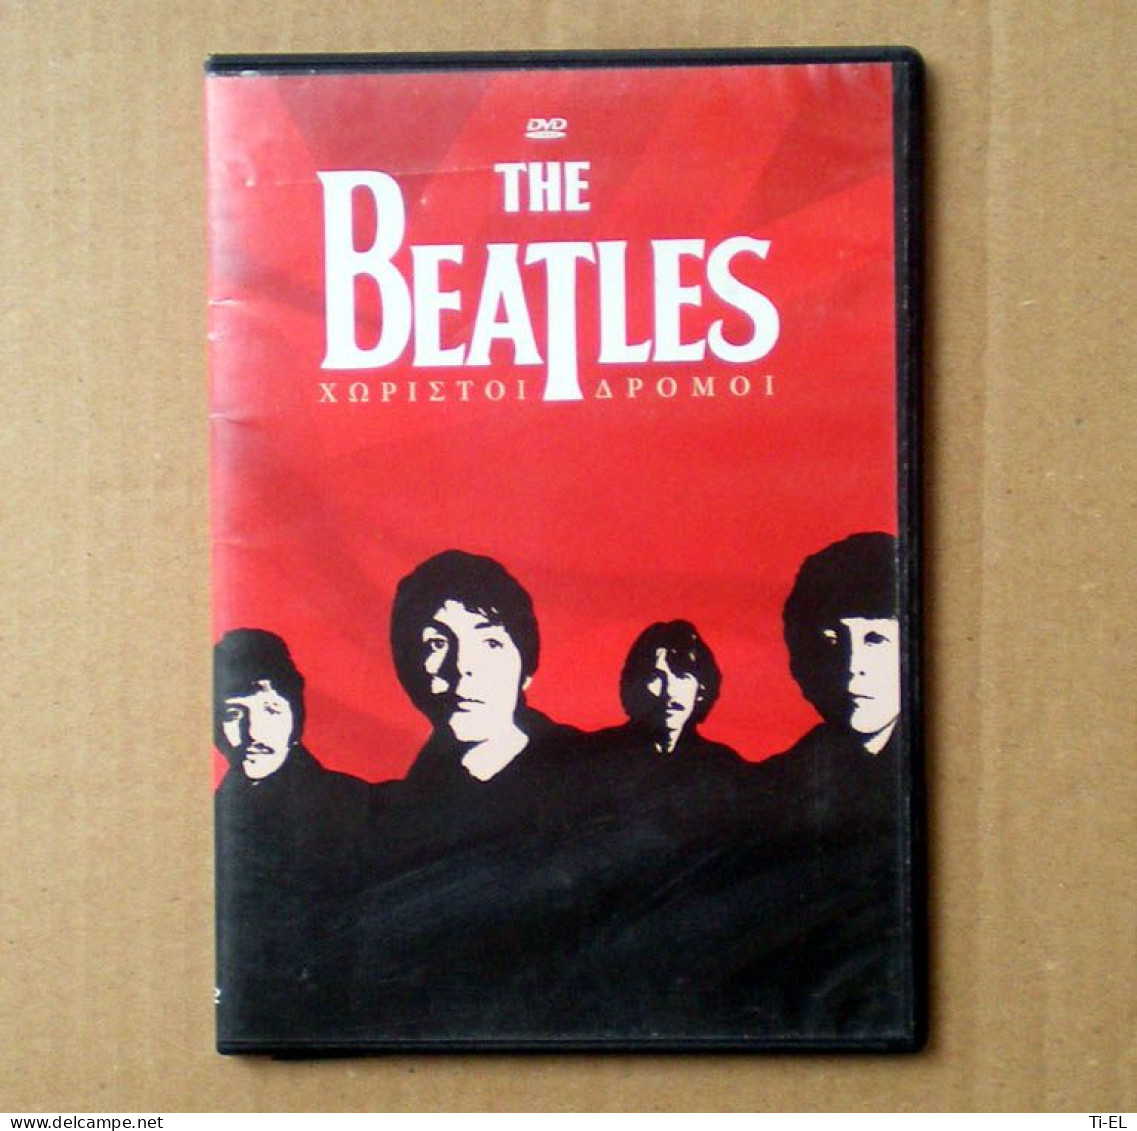 THE BEATLES "Χωριστοί δρόμοι" DVD From Greece (in English) ~52mins - DVD Musicales